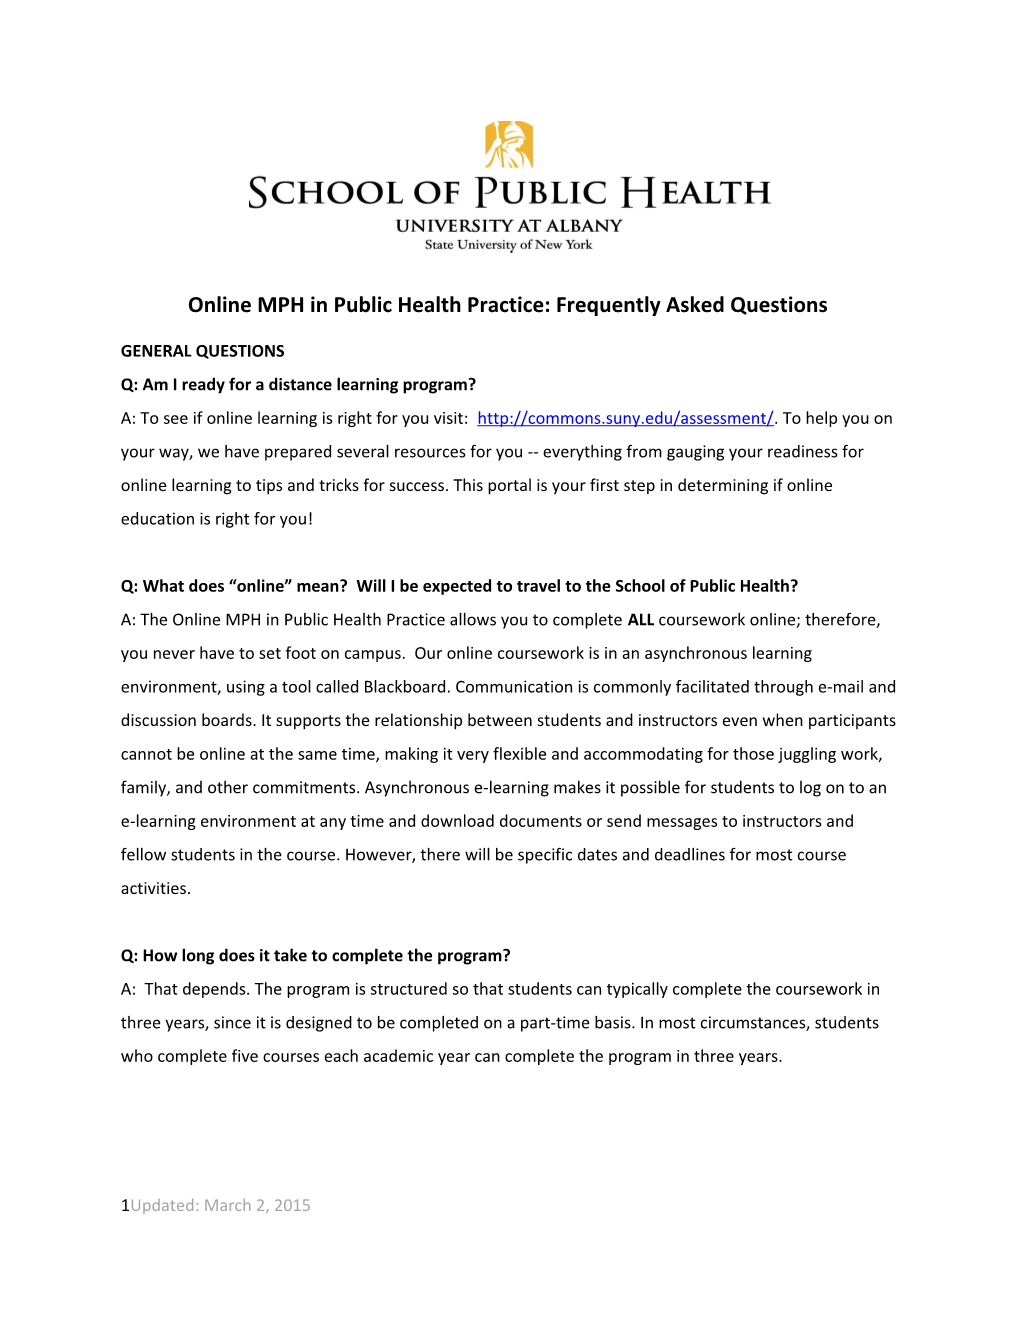 Online MPH in Public Health Practice: Frequently Asked Questions